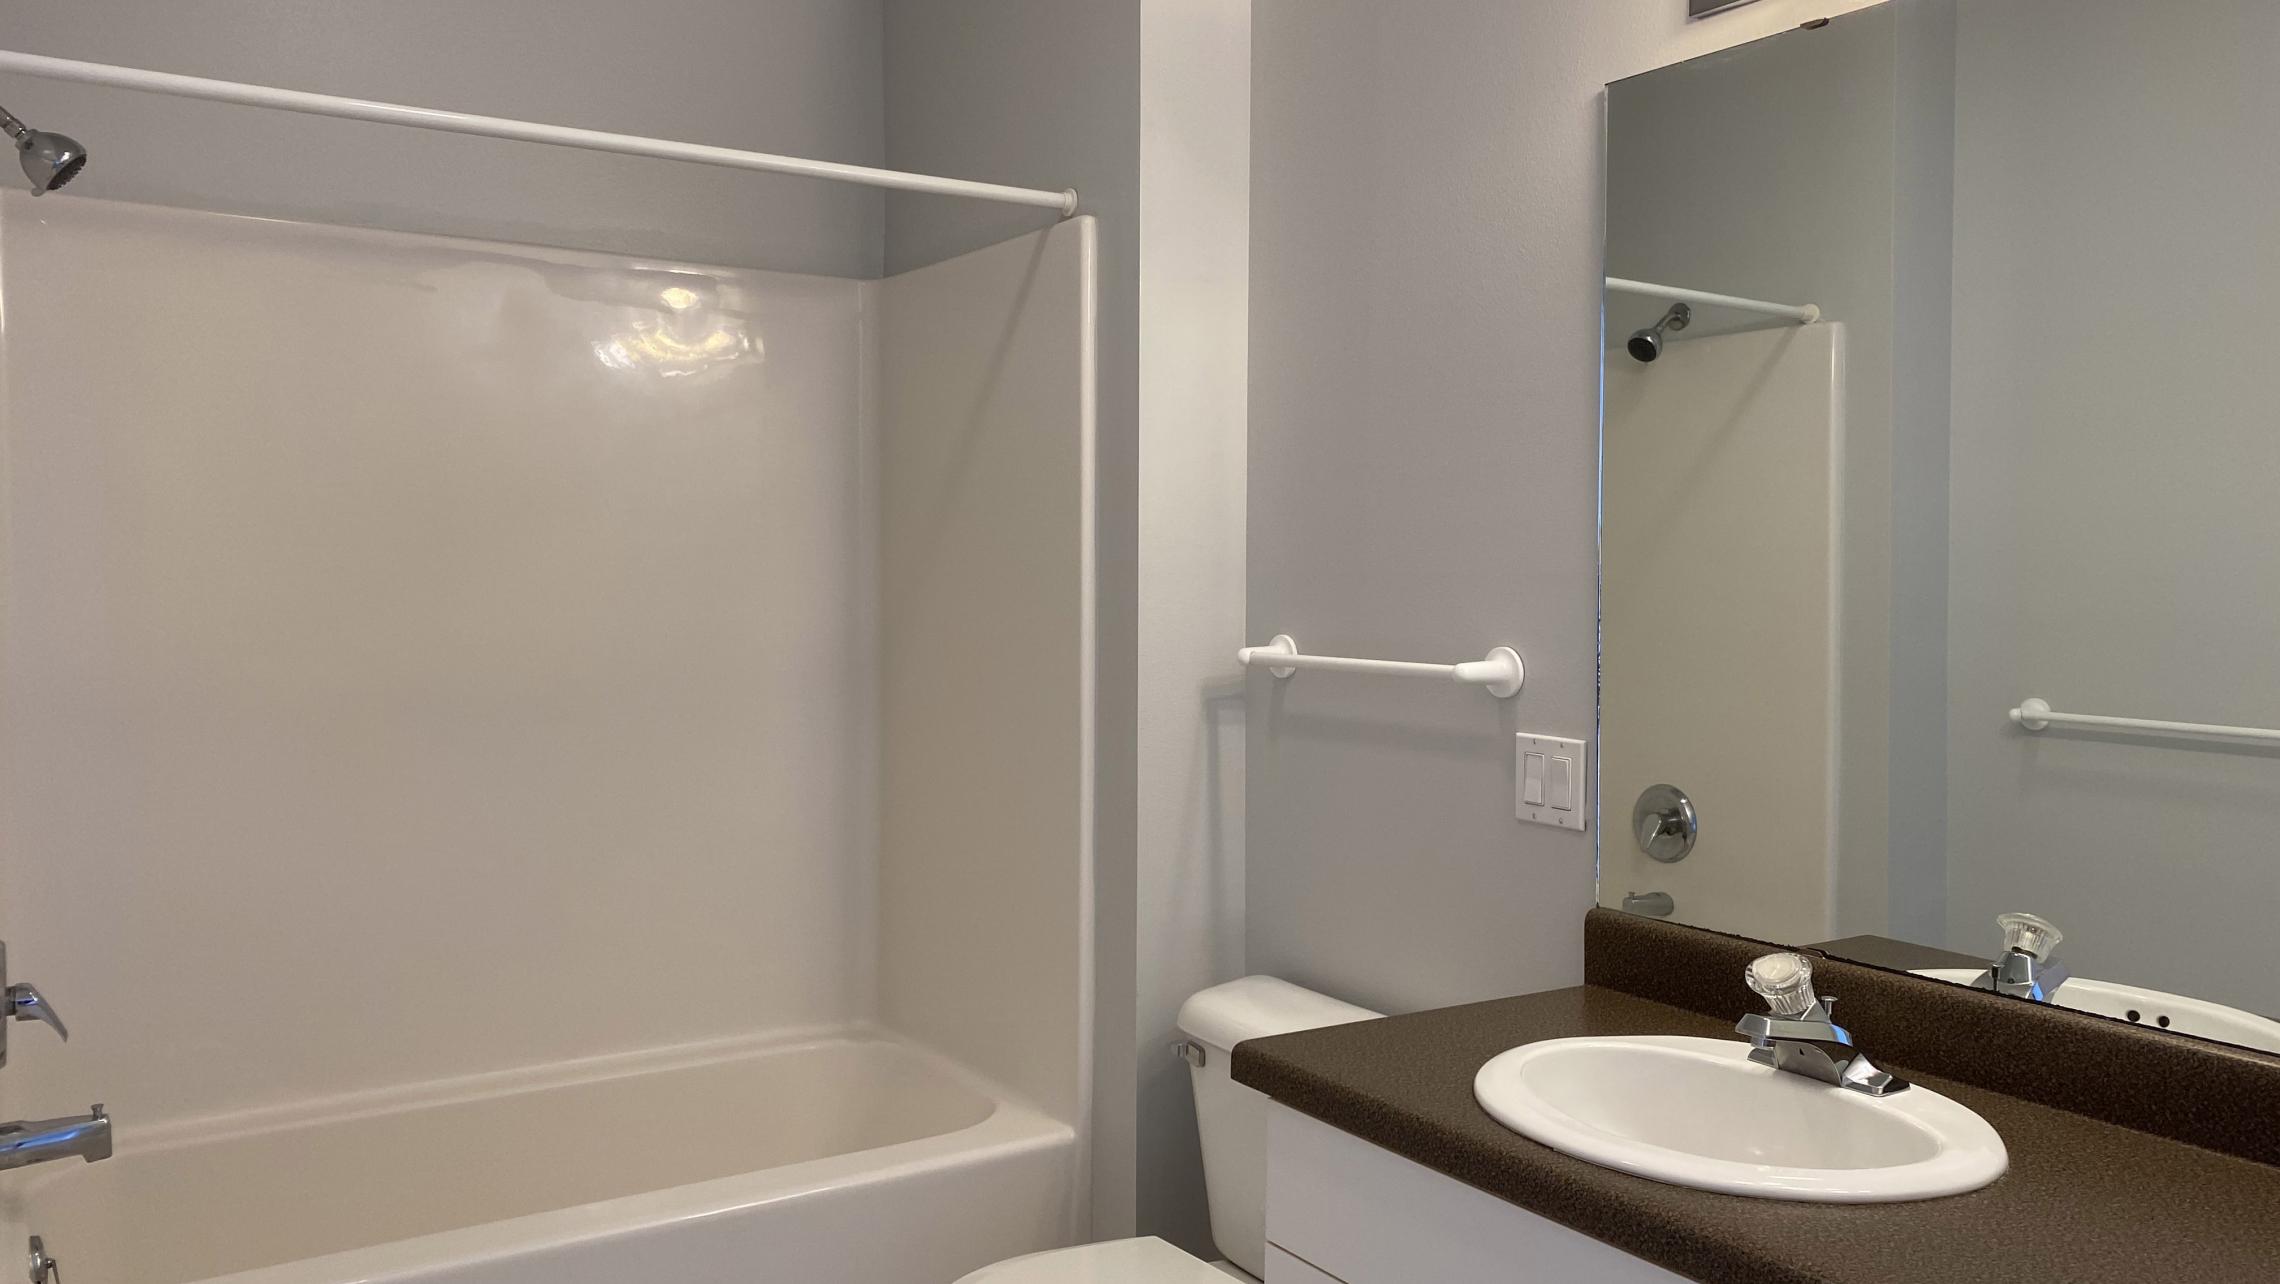 City-Place-Apartment-310-One-Bedroom-Natural-Light-Sunny-Bright-Bathroom-Kitchen-Living-Balcony-Downtown-Madison-Bike-City-Capitol-Lifestyle-Home-Laundry-Storage-Closet-Bathtub